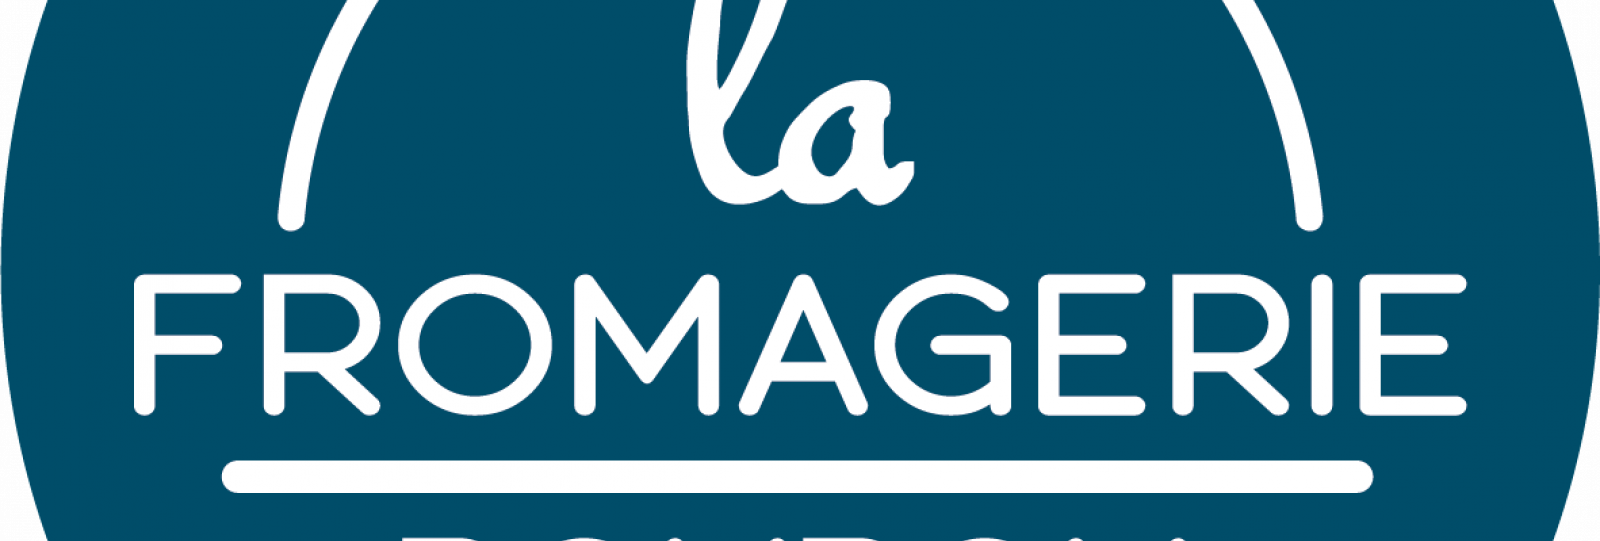 La Fromagerie Ponpon